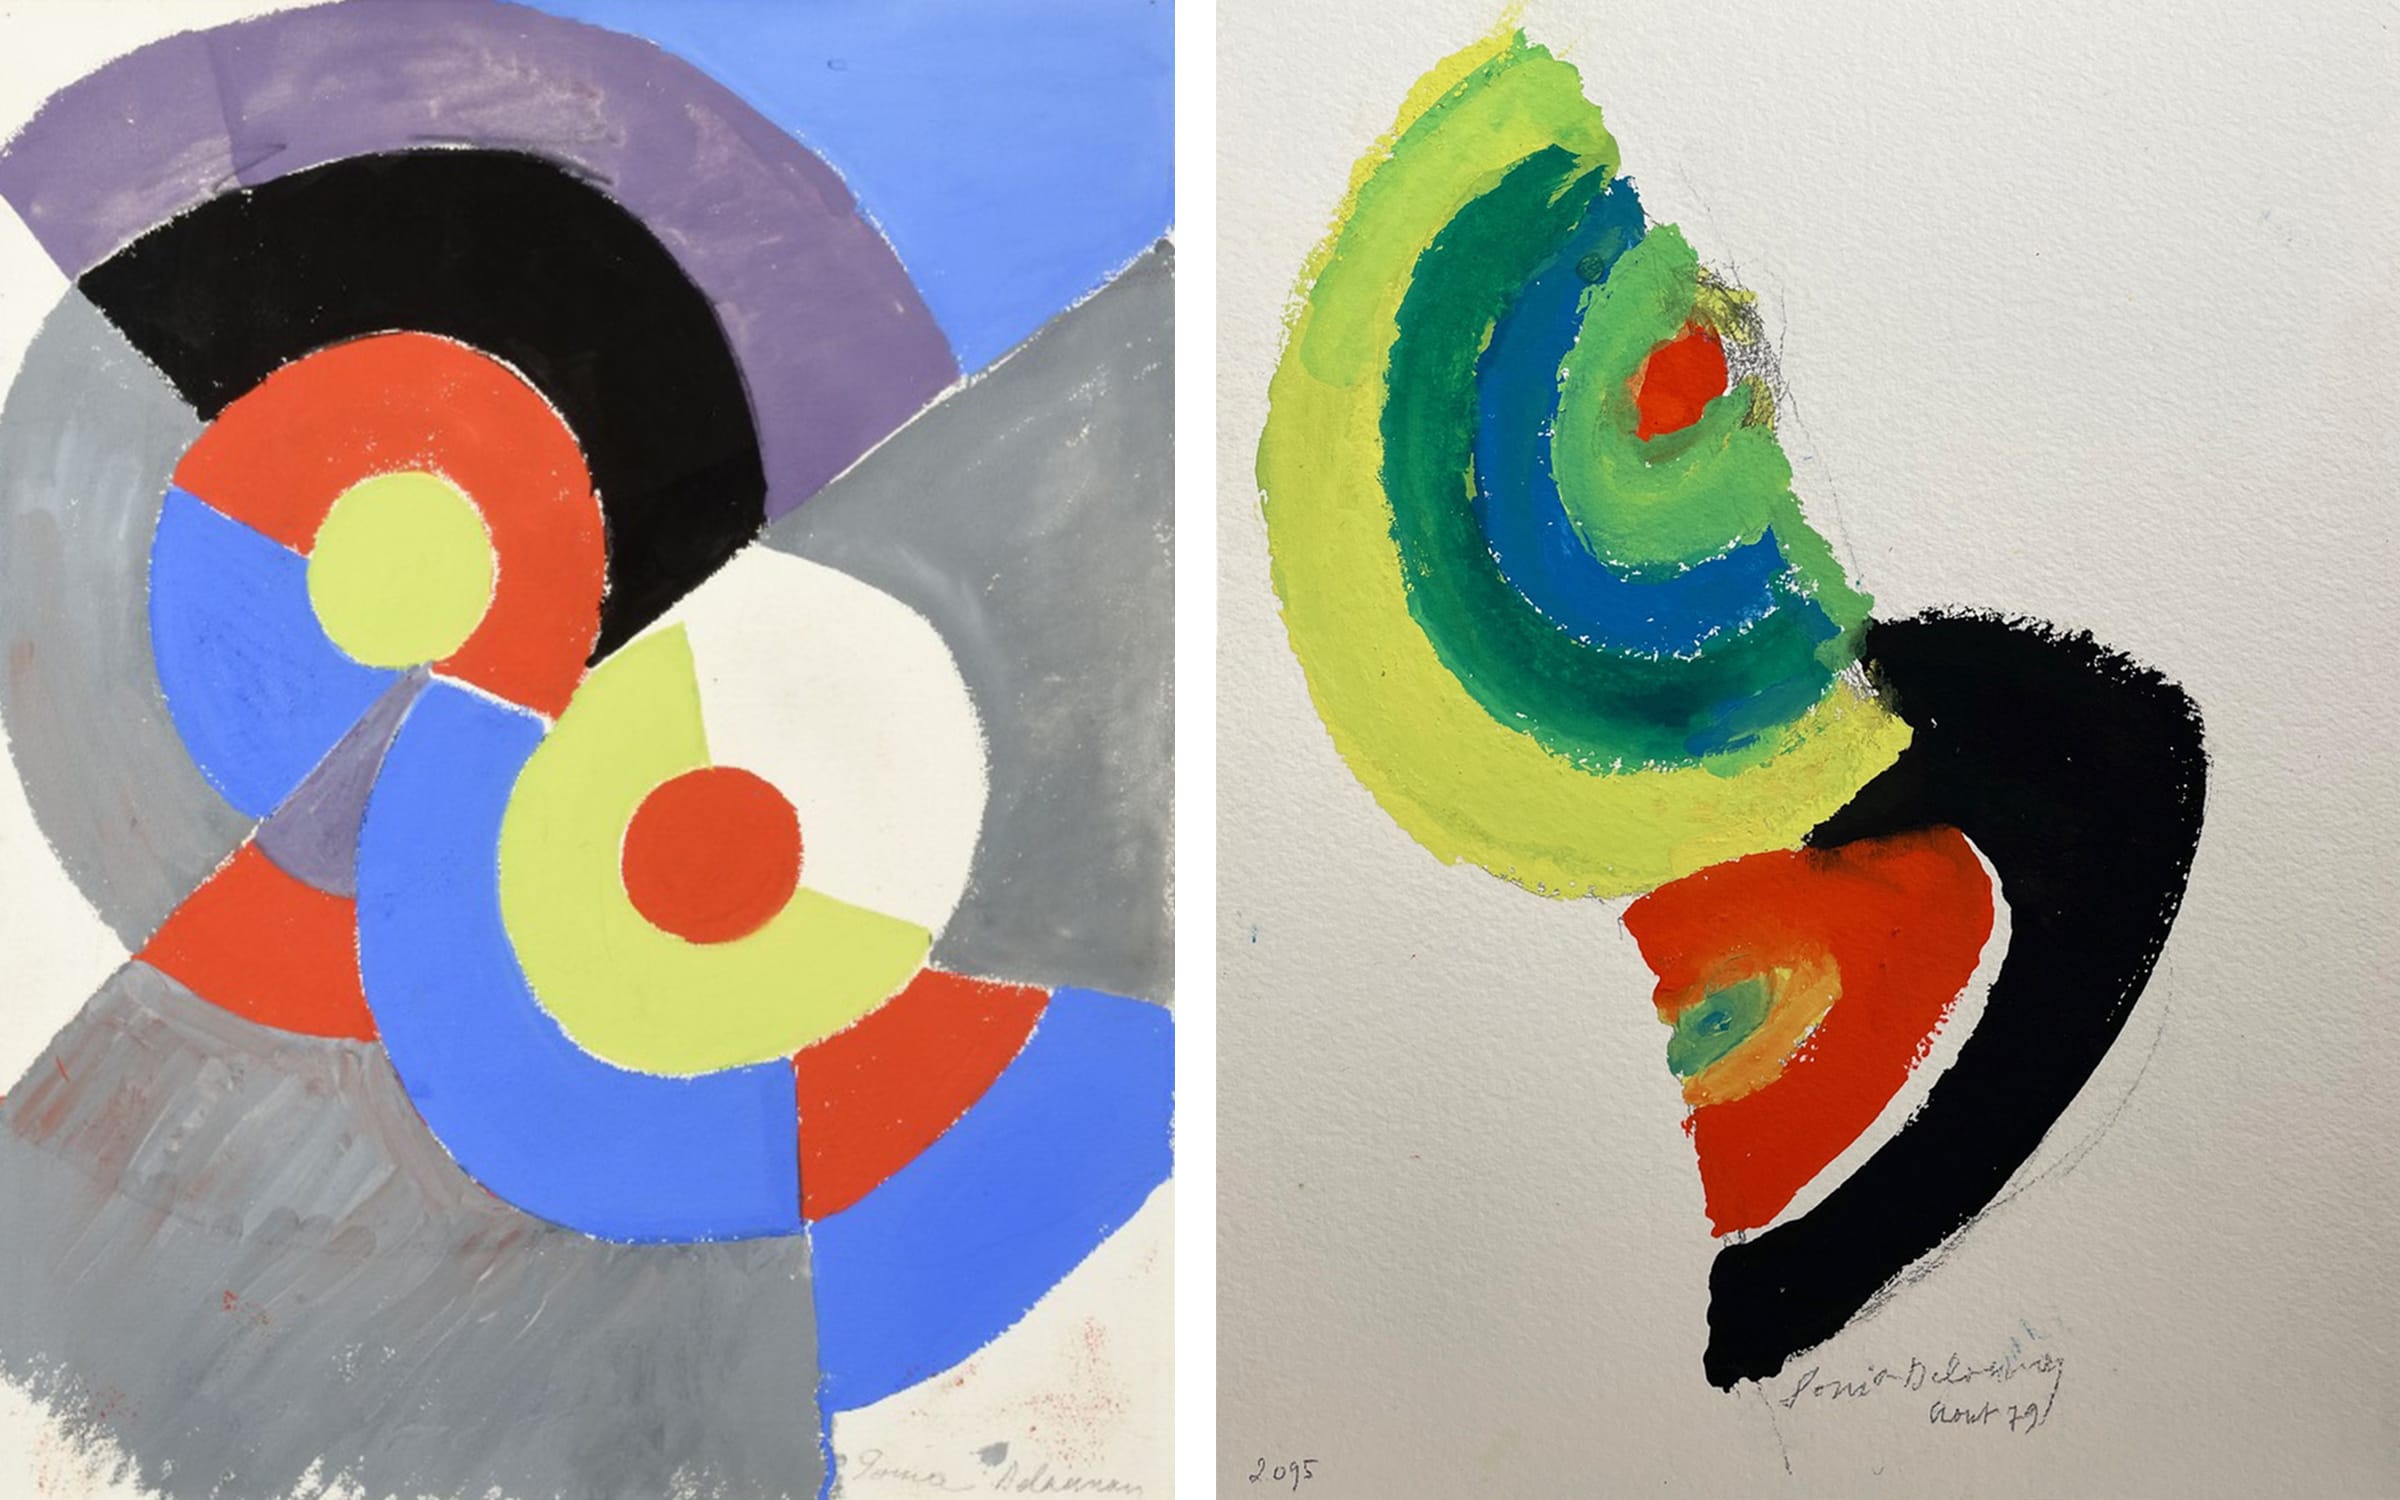 Left: Rythme, 1961. Right: Couleur, 1979. Both artworks by Sonia Delaunay. Copyright : Pracusa 20210319. Courtesy Galerie Zlotowski.